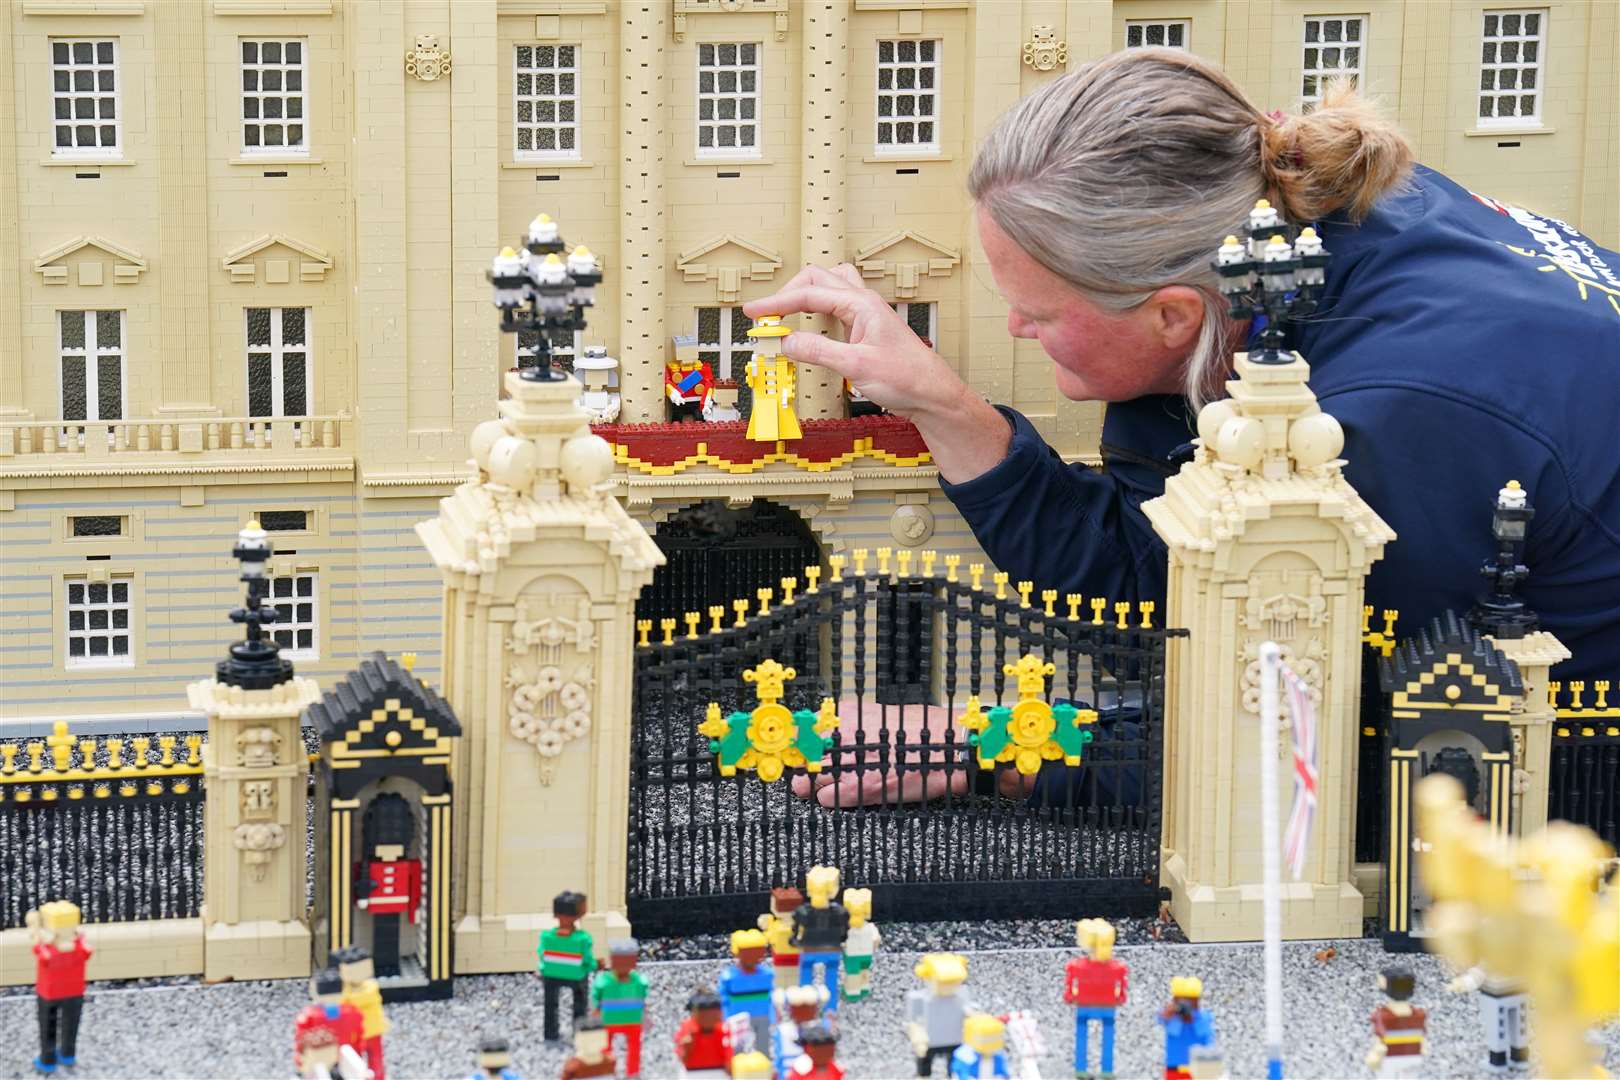 Model maker Paula Young places a Lego replica of the Queen in a display replicating the balcony scene at Buckingham Palace (Jonathan Brady/PA)